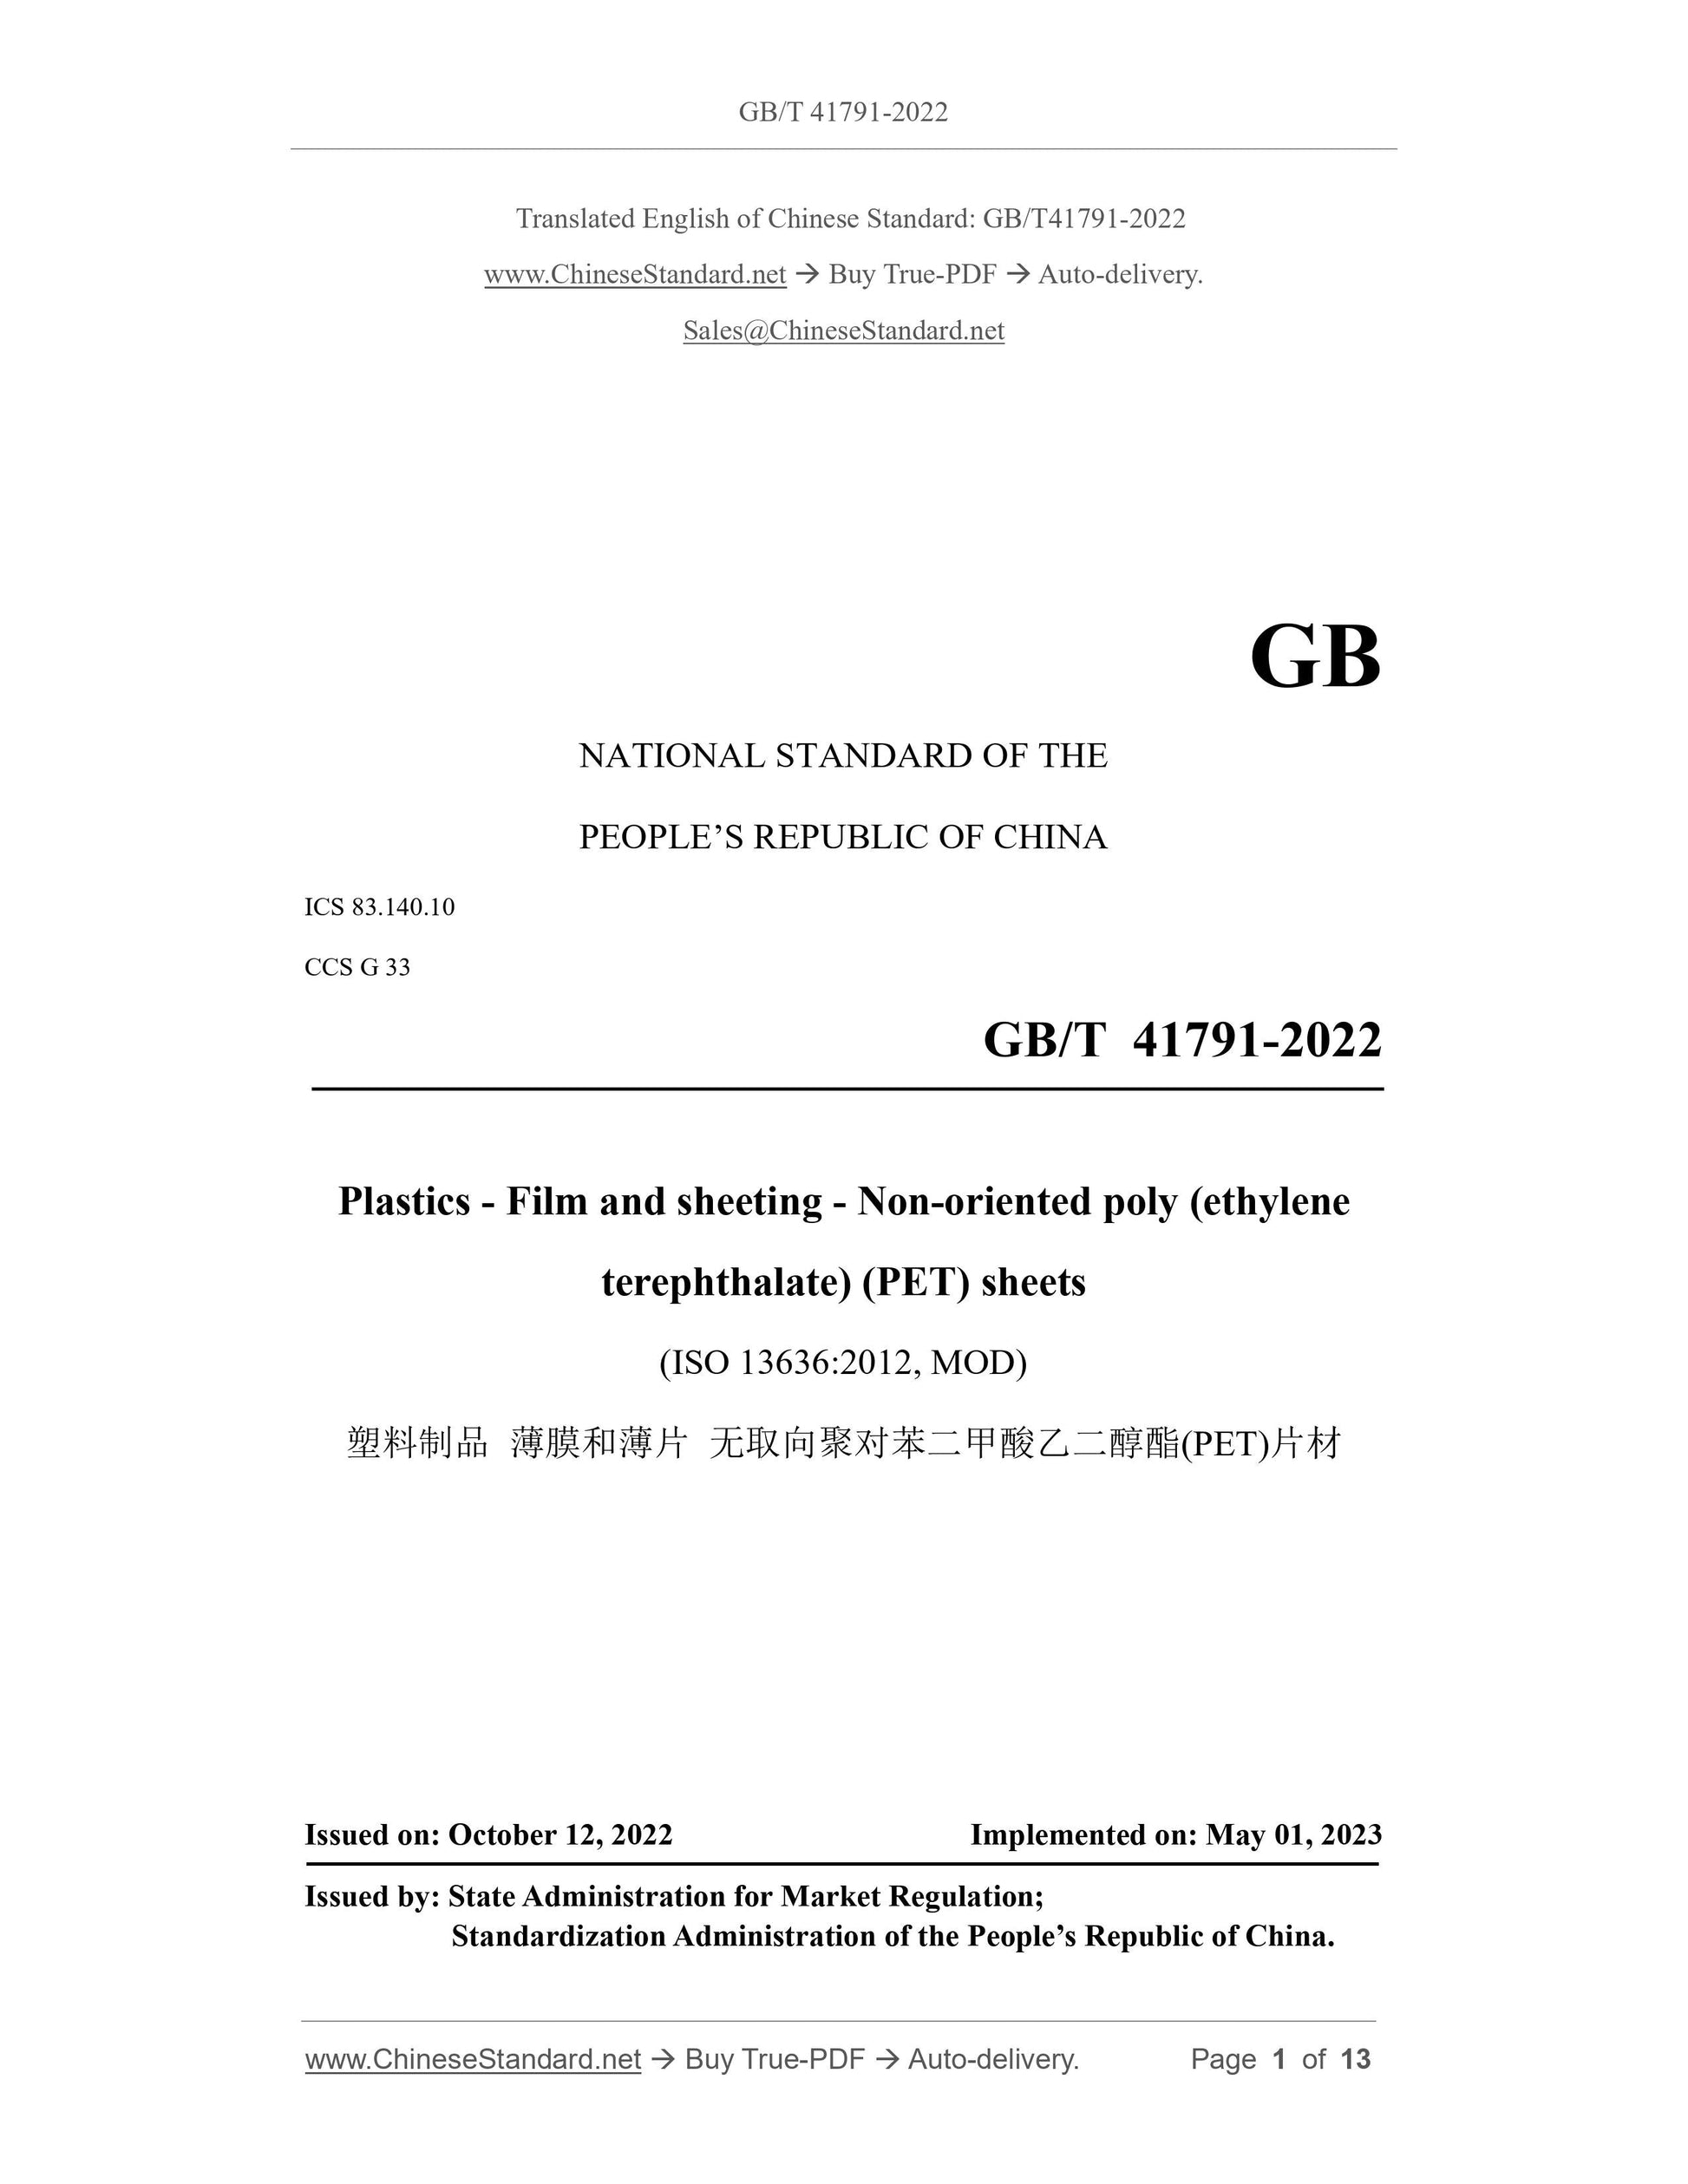 GB/T 41791-2022 Page 1